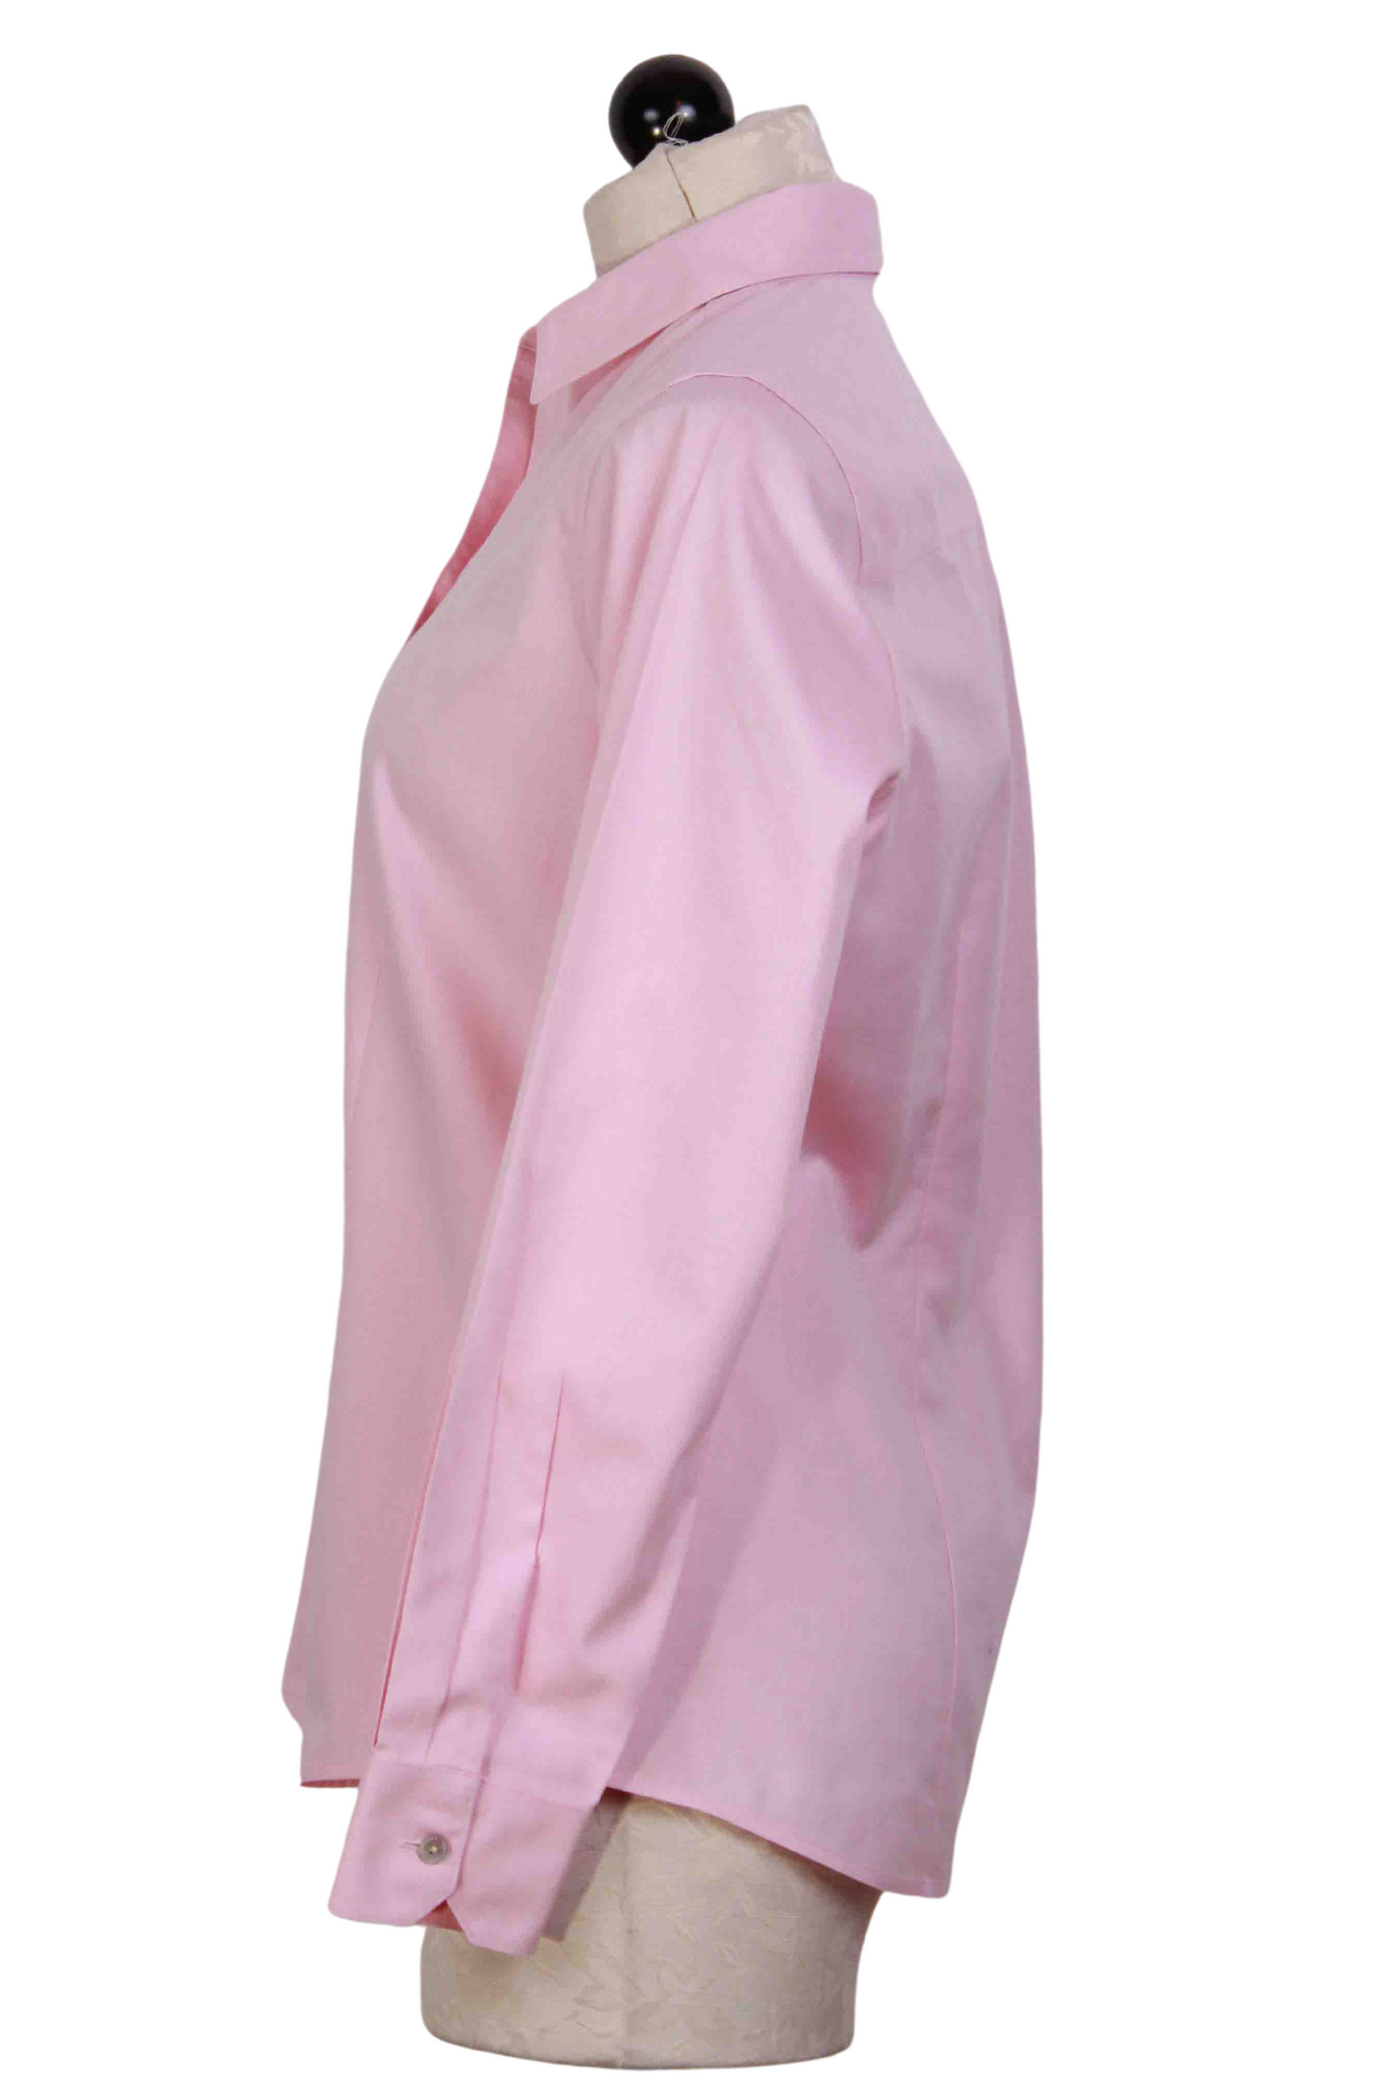 side view of Chambray Pink Classic collared, tailored Dianna blouse by Foxcroft